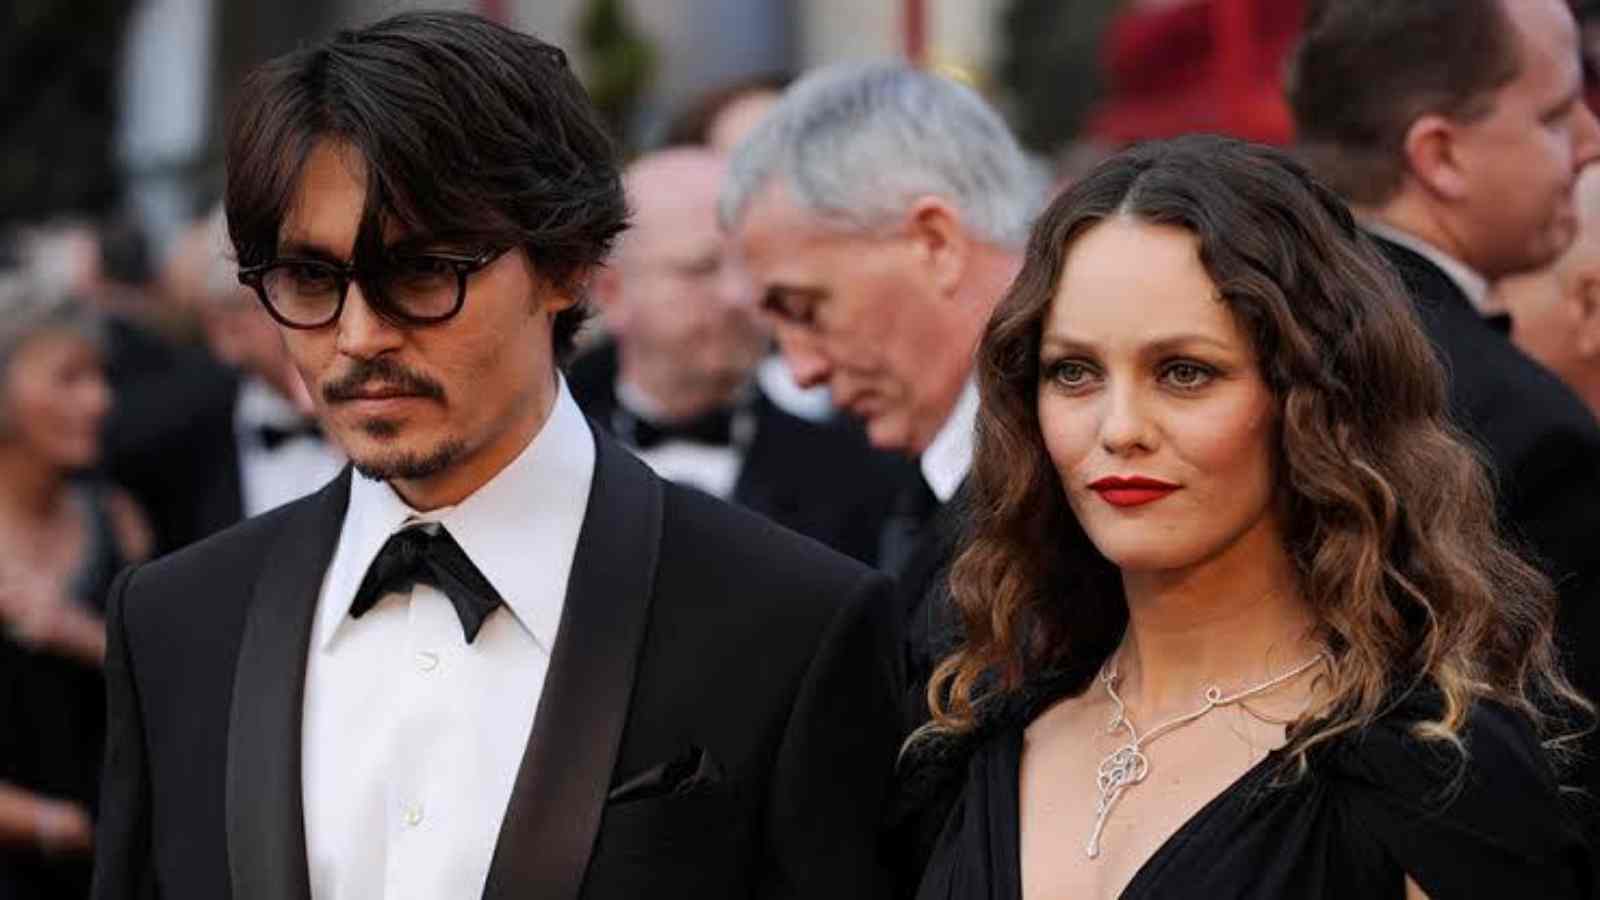 Johnny Depp learnt French because of his two children